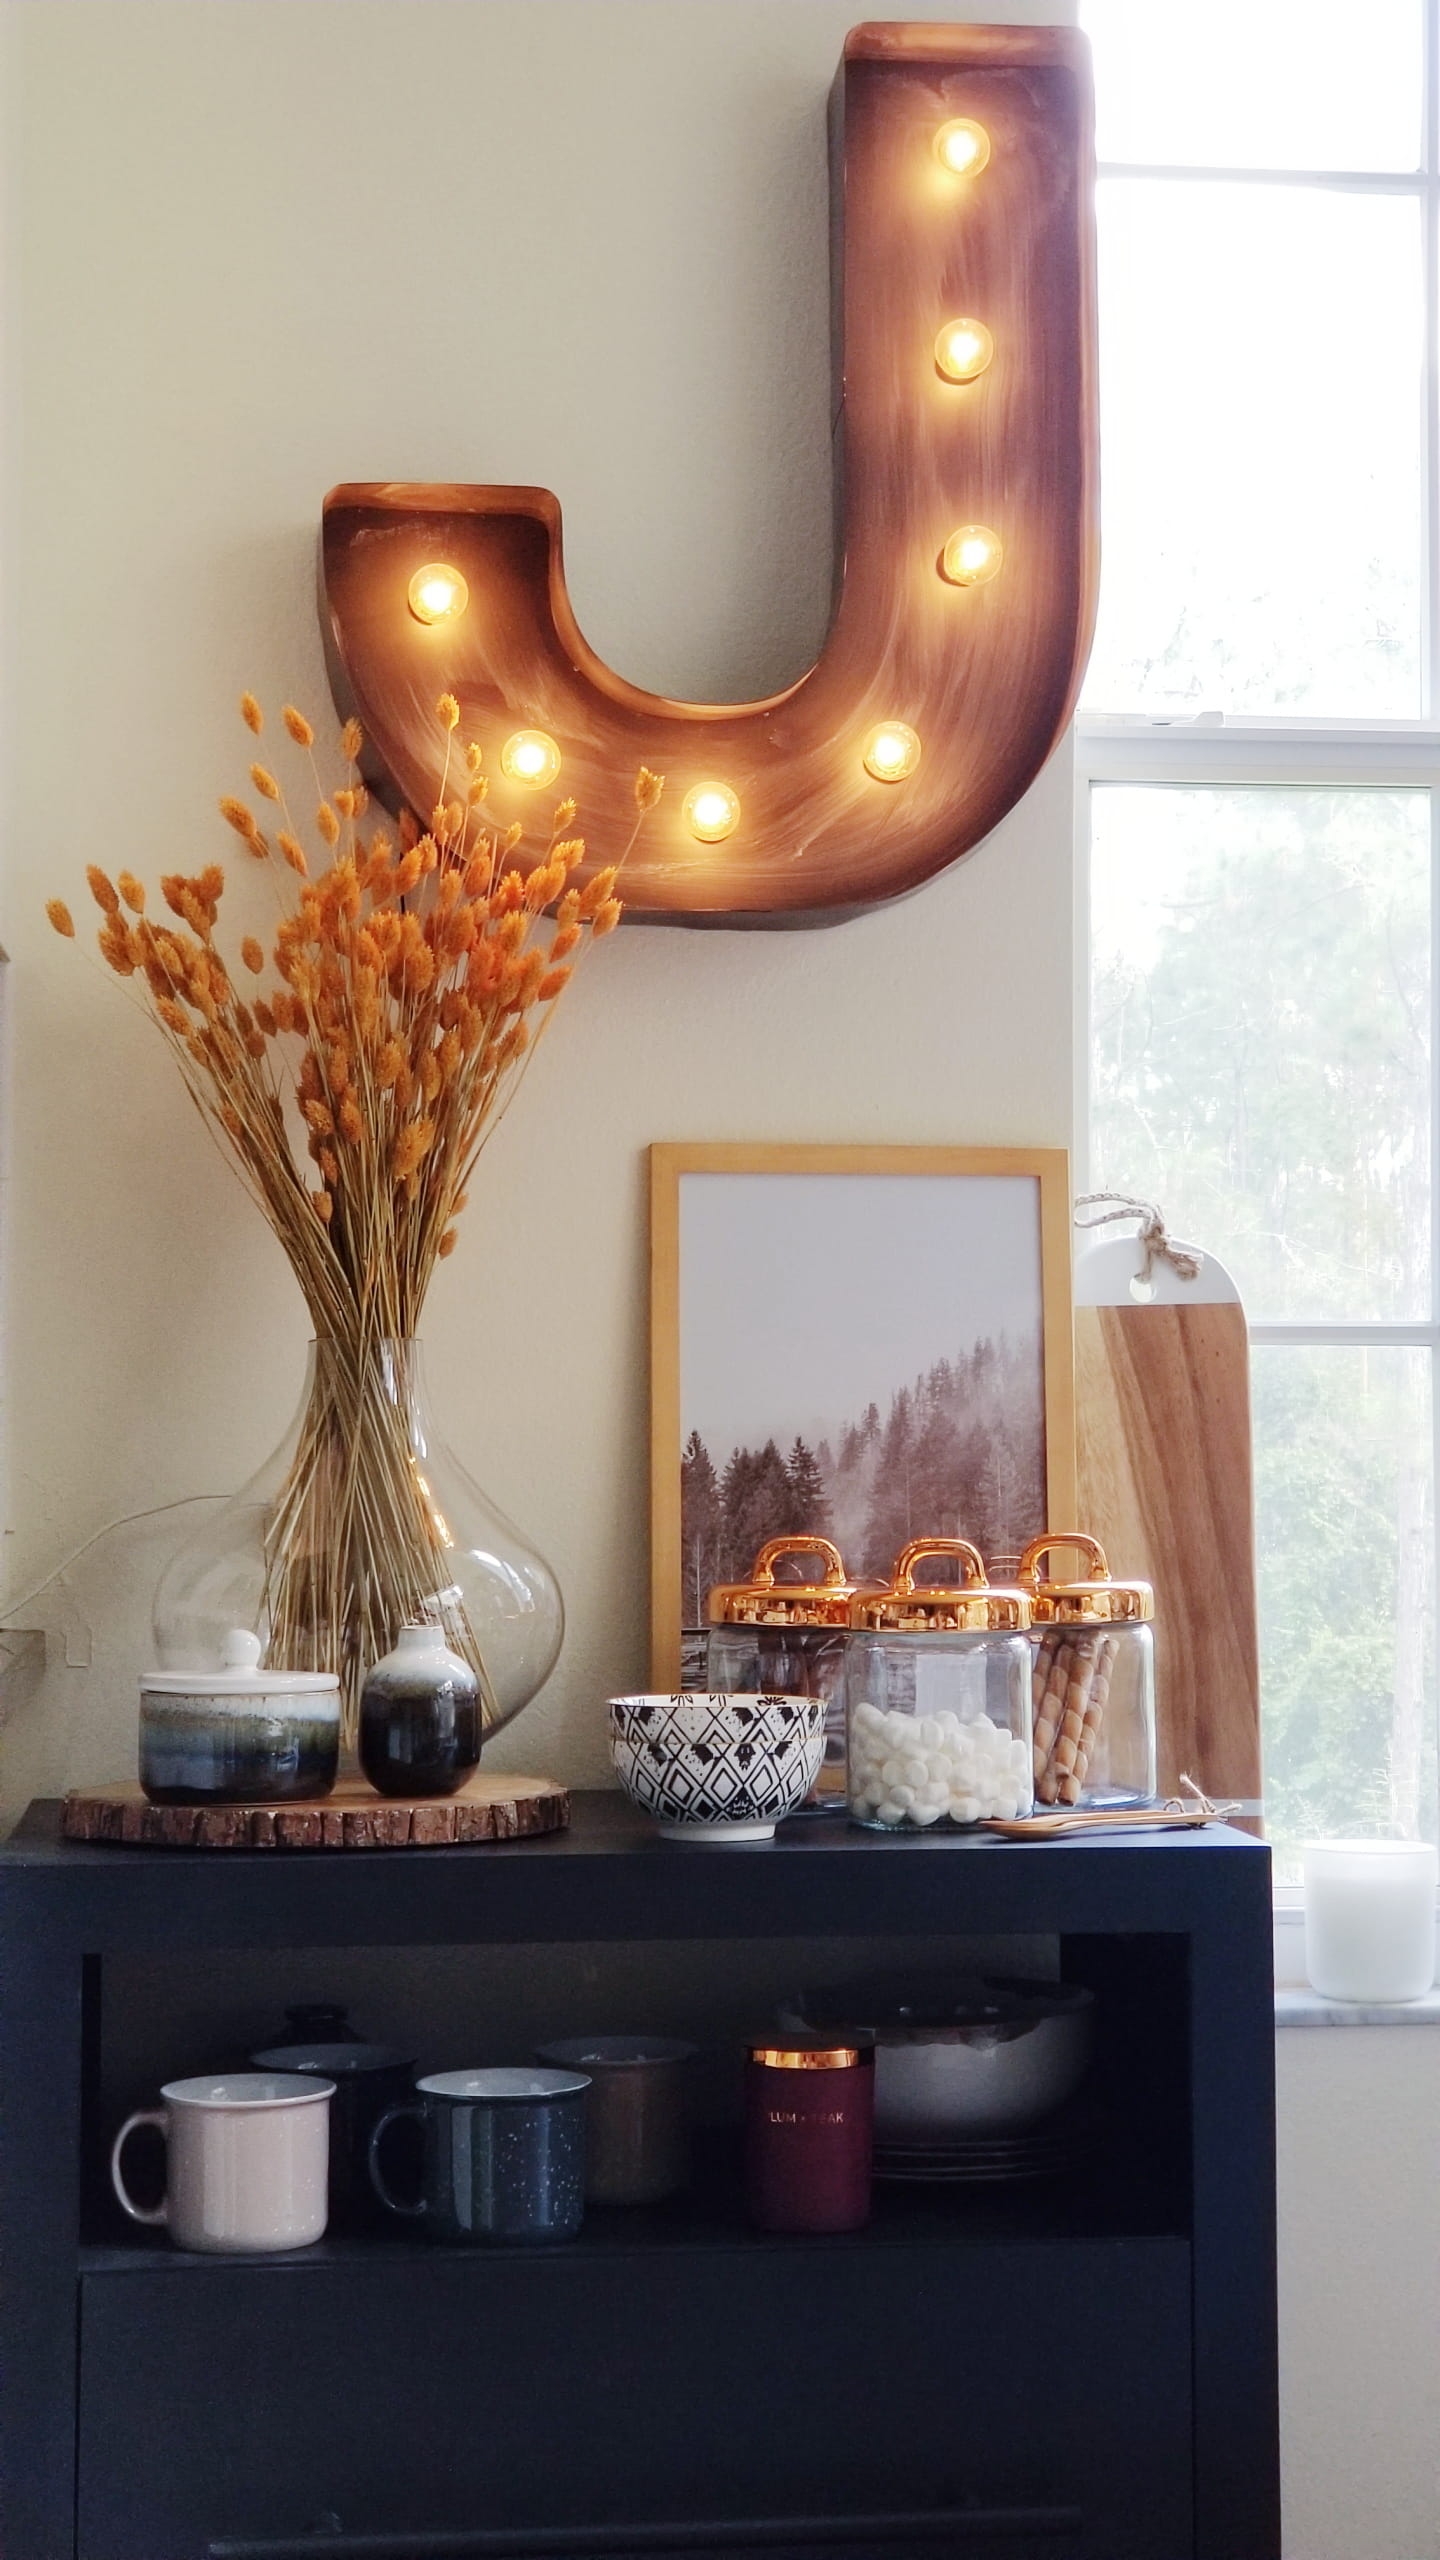 At Home Coffee Bar Kitchen Decor Fall Decorating black and white rustic industrial cozy minimalist modern anthropologie style marquee light copper dried flowers pottery ideas hot chocolate tea smores wood accessories fall flowers